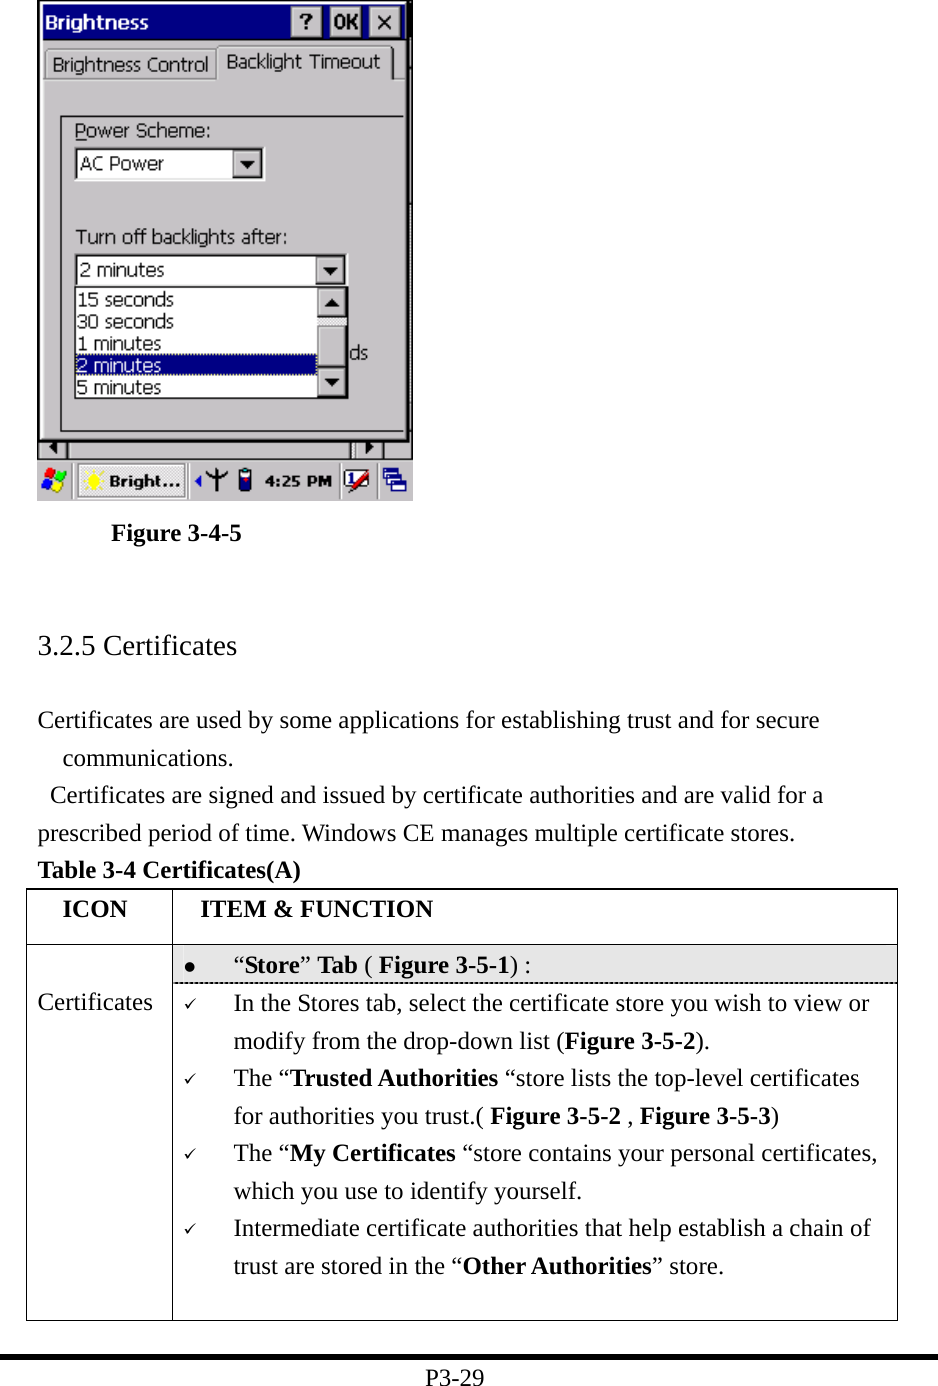    Figure 3-4-5   3.2.5 Certificates  Certificates are used by some applications for establishing trust and for secure communications.    Certificates are signed and issued by certificate authorities and are valid for a prescribed period of time. Windows CE manages multiple certificate stores. Table 3-4 Certificates(A)   ICON   ITEM &amp; FUNCTION   “Store” Tab ( Figure 3-5-1) :    Certificates    In the Stores tab, select the certificate store you wish to view or modify from the drop-down list (Figure 3-5-2).     The “Trusted Authorities “store lists the top-level certificates for authorities you trust.( Figure 3-5-2 , Figure 3-5-3)     The “My Certificates “store contains your personal certificates, which you use to identify yourself.     Intermediate certificate authorities that help establish a chain of trust are stored in the “Other Authorities” store.  P3-29 